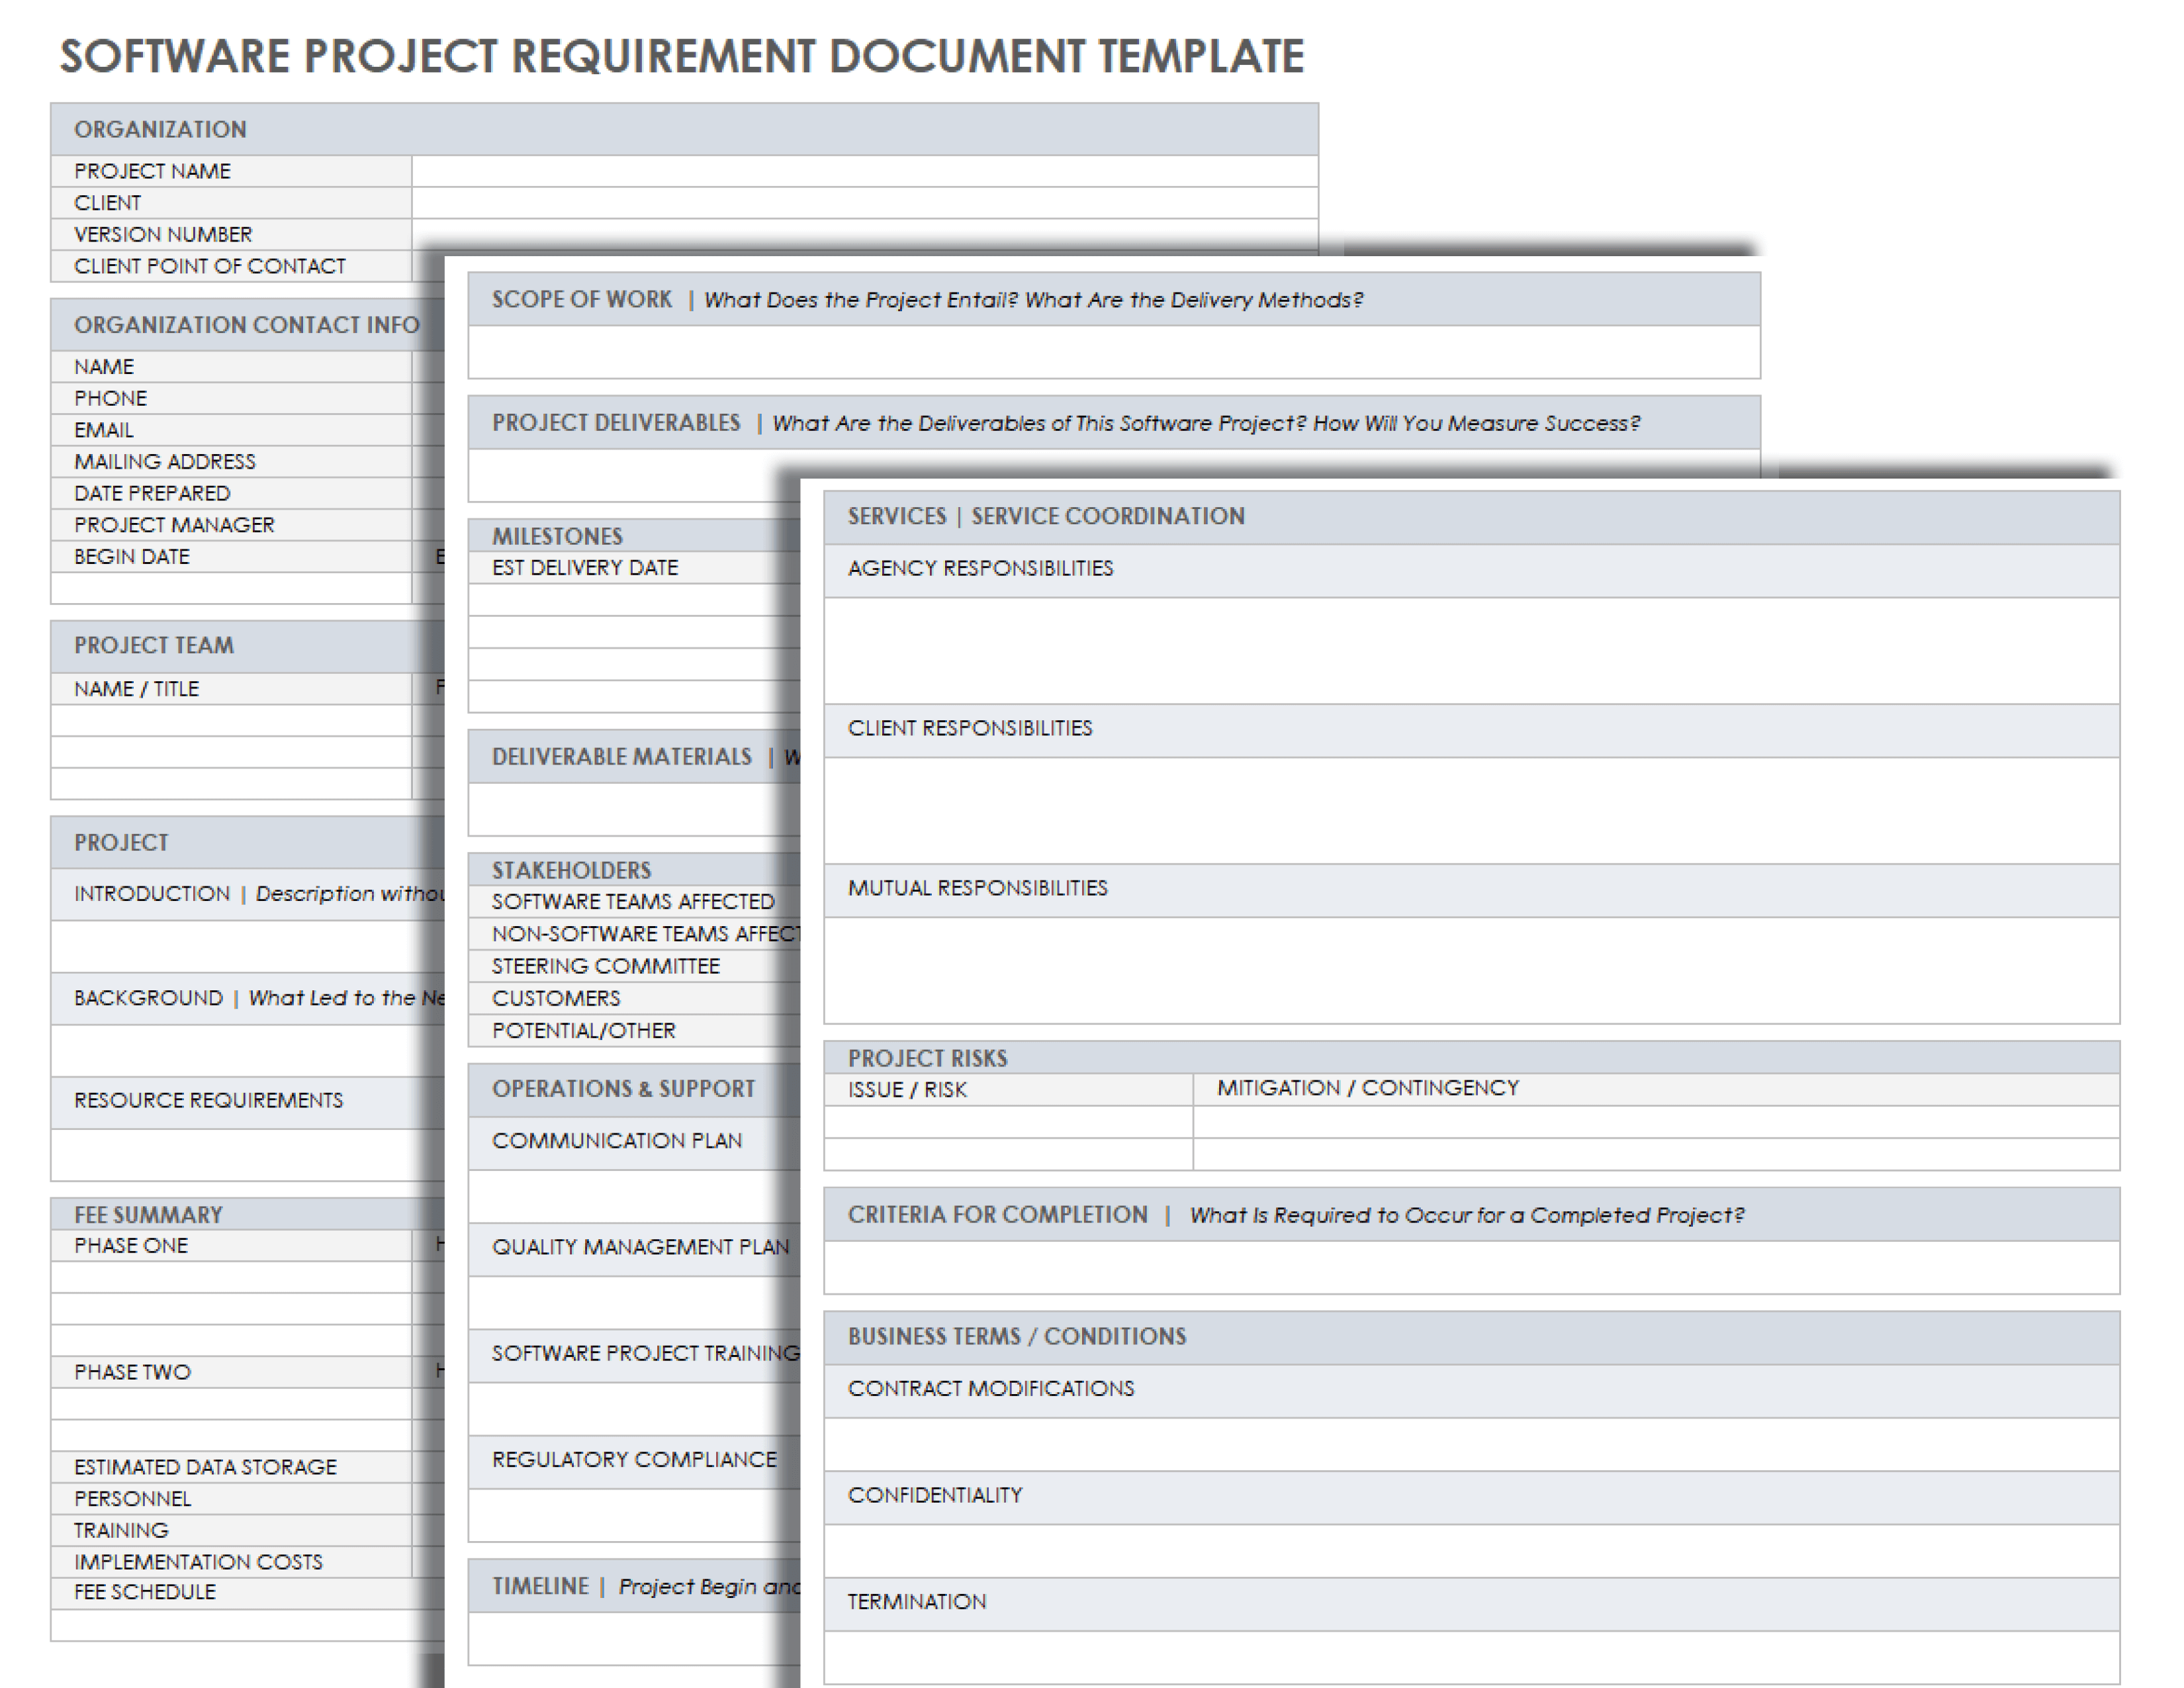 Software Project Requirement Document Template